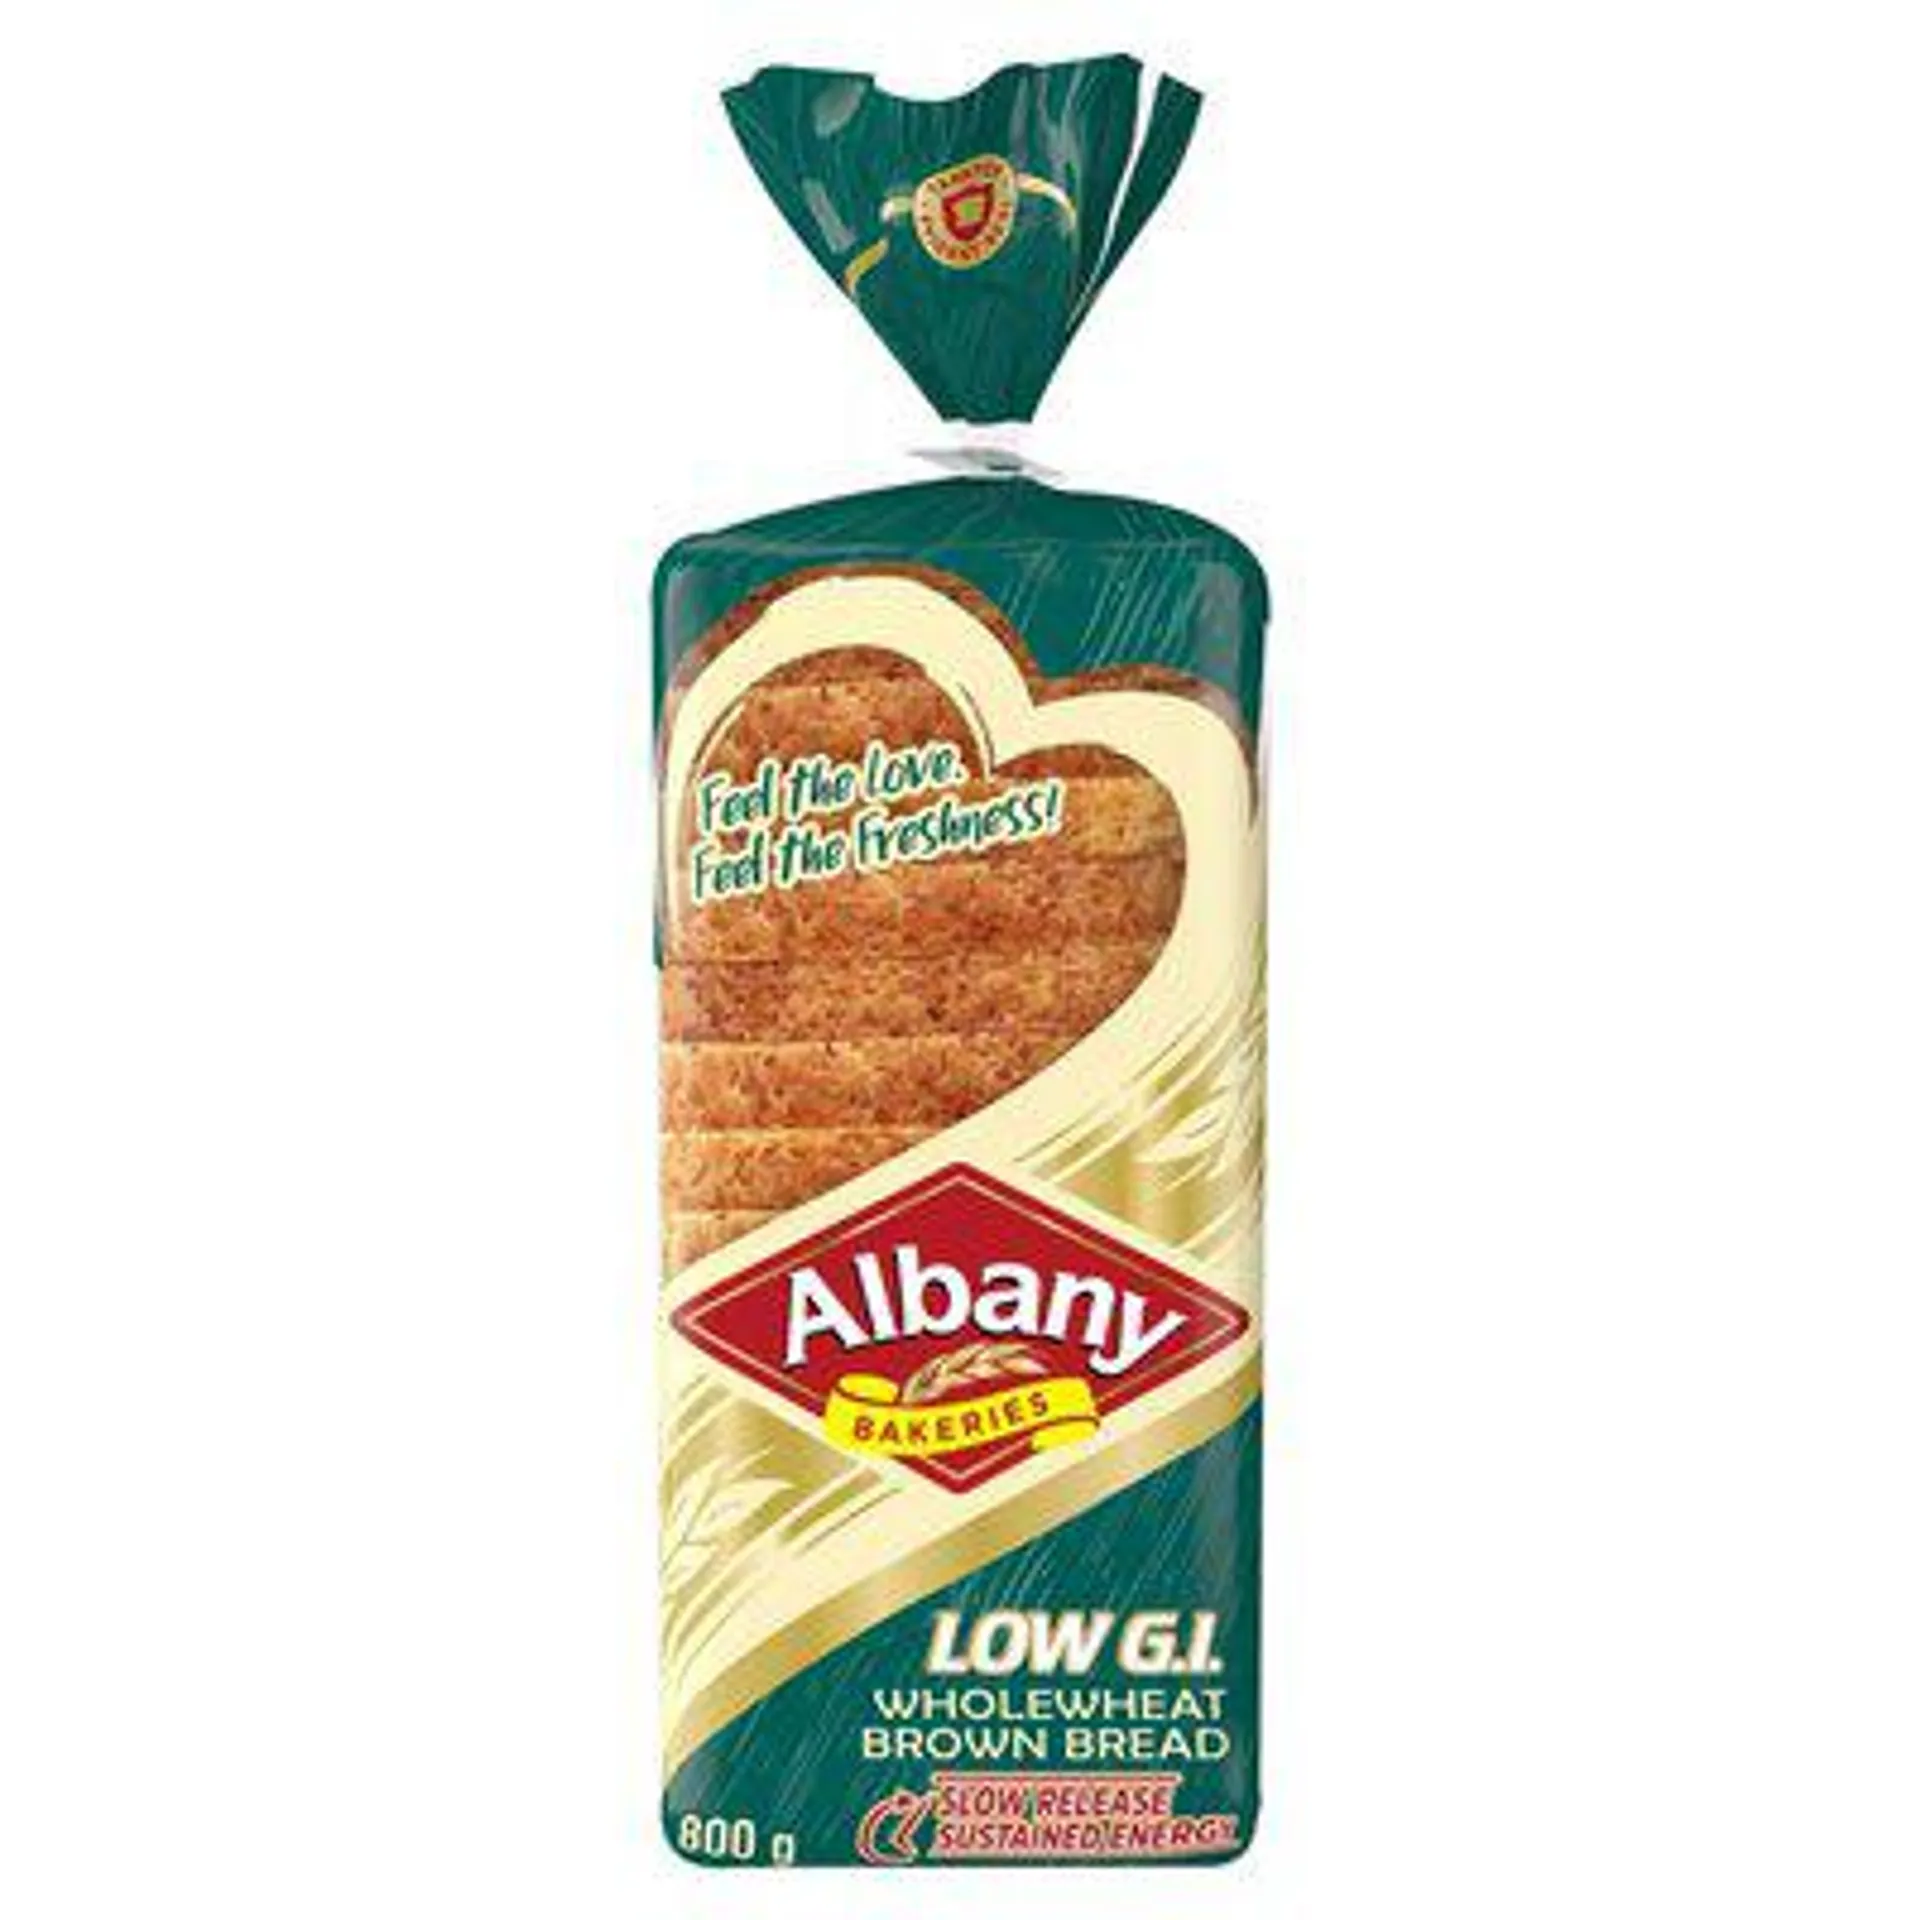 Albany Superior Whole Wheat Brown Bread Low Gi 800g